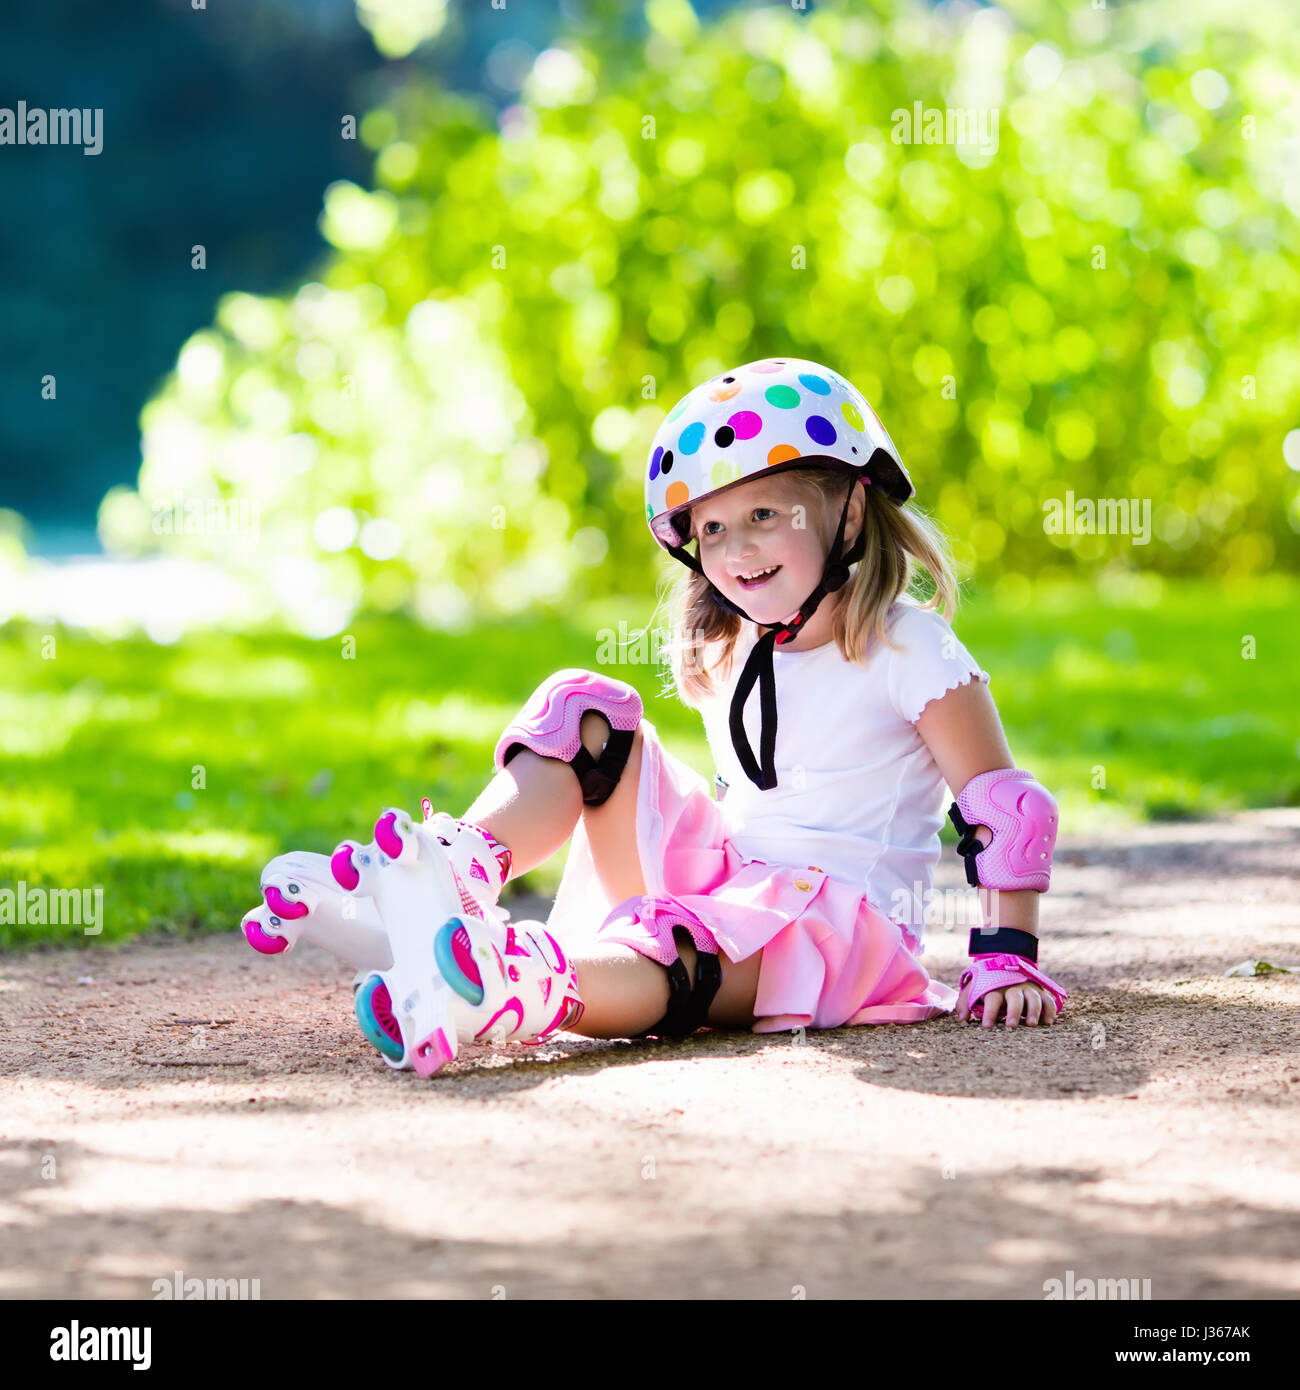 Little Girl Learning To Roller Skate In Sunny Summer Park. Child Wearing  Protection Elbow And Knee Pads, Wrist Guards And Safety Helmet For Safe  Roller Skating Ride. Active Outdoor Sport For Kids.